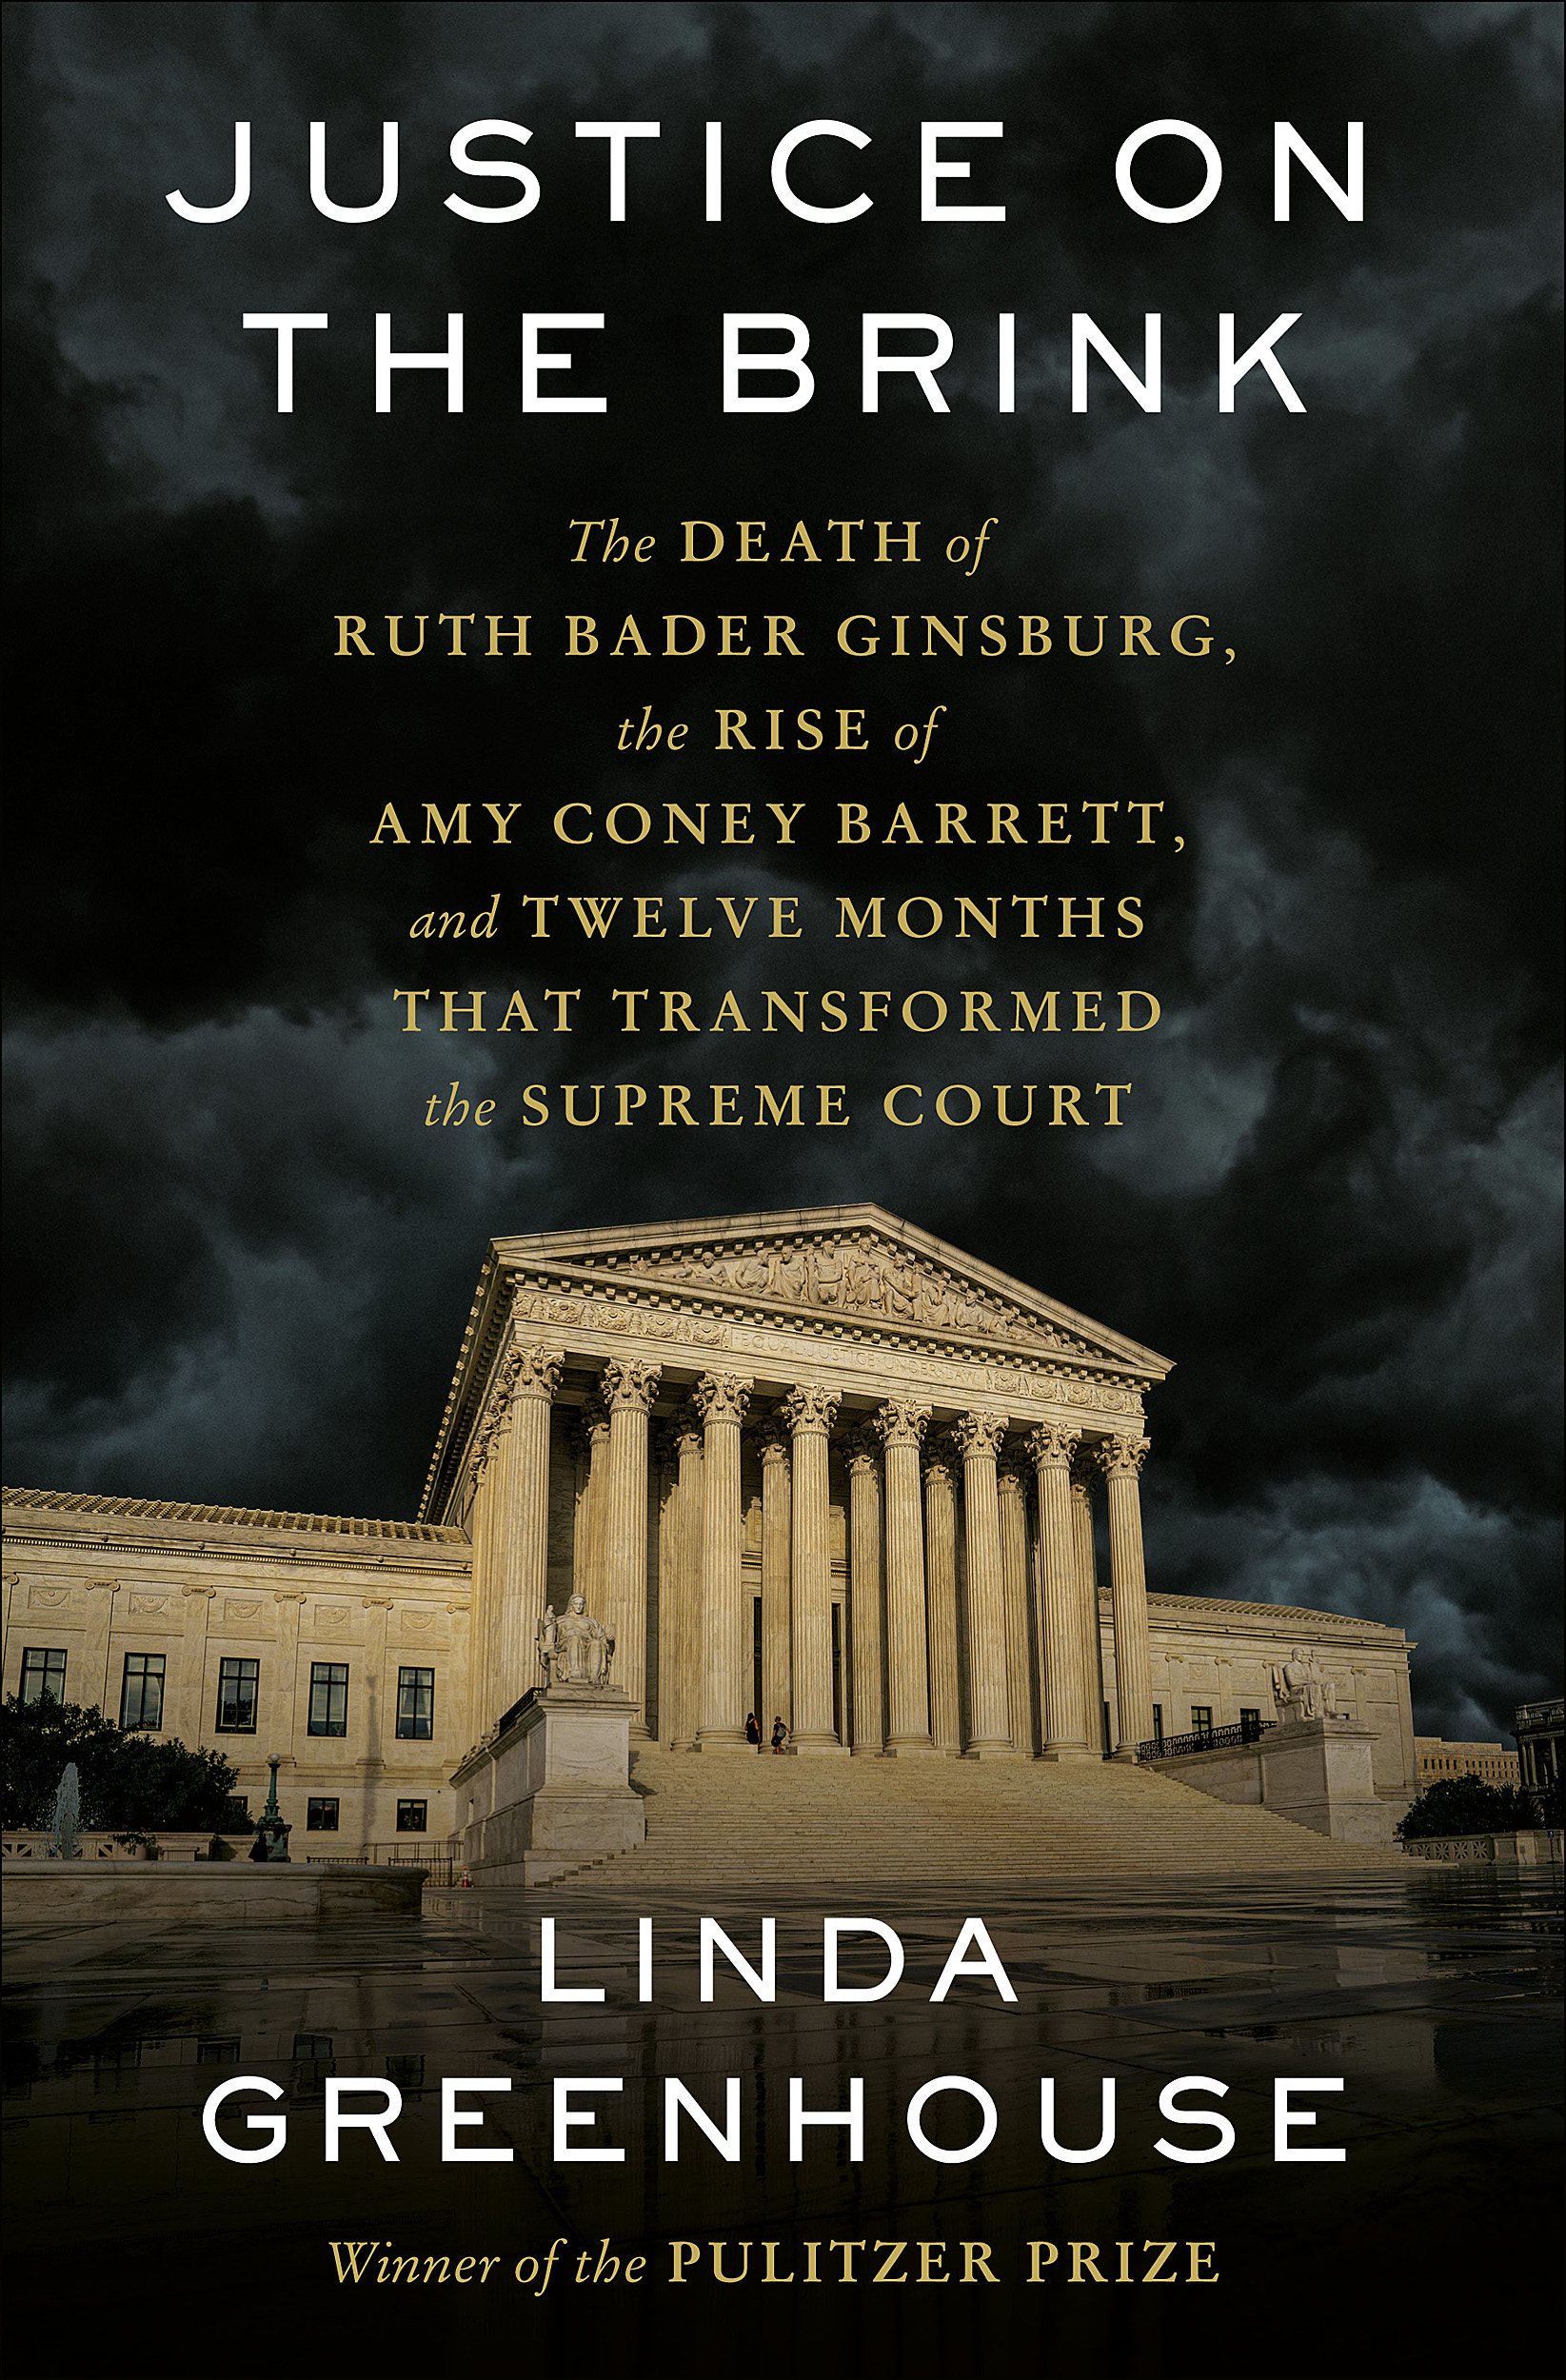 Justice on the brink book cover.